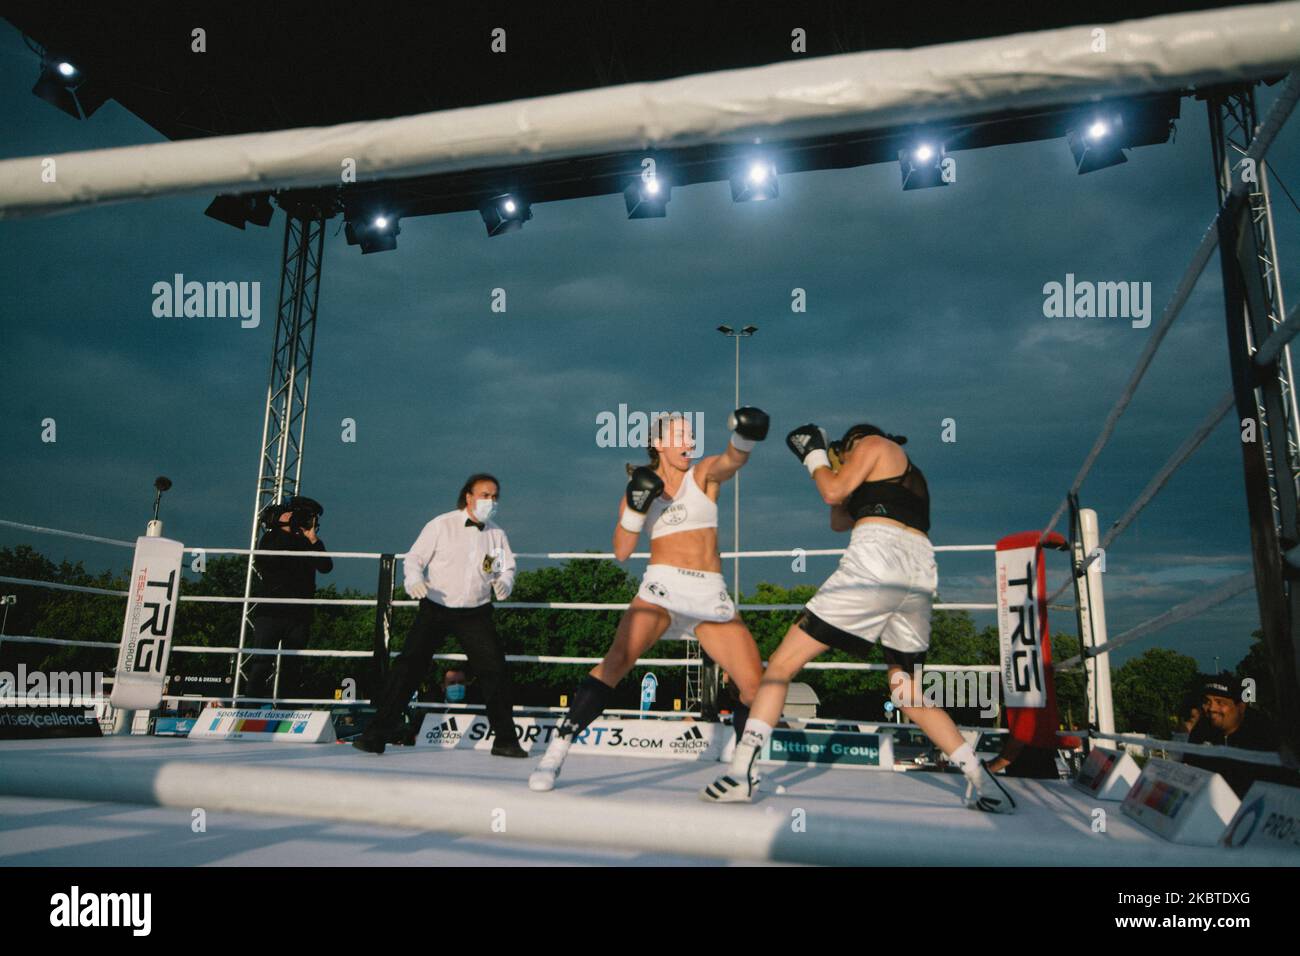 Boxing fight between Dilar Kisikyol and Tereza Dvorakova during the drive in boxing fight night in Duesseldorf, Germany on July 11, 2020 (Photo by Ying Tang/NurPhoto) Stock Photo